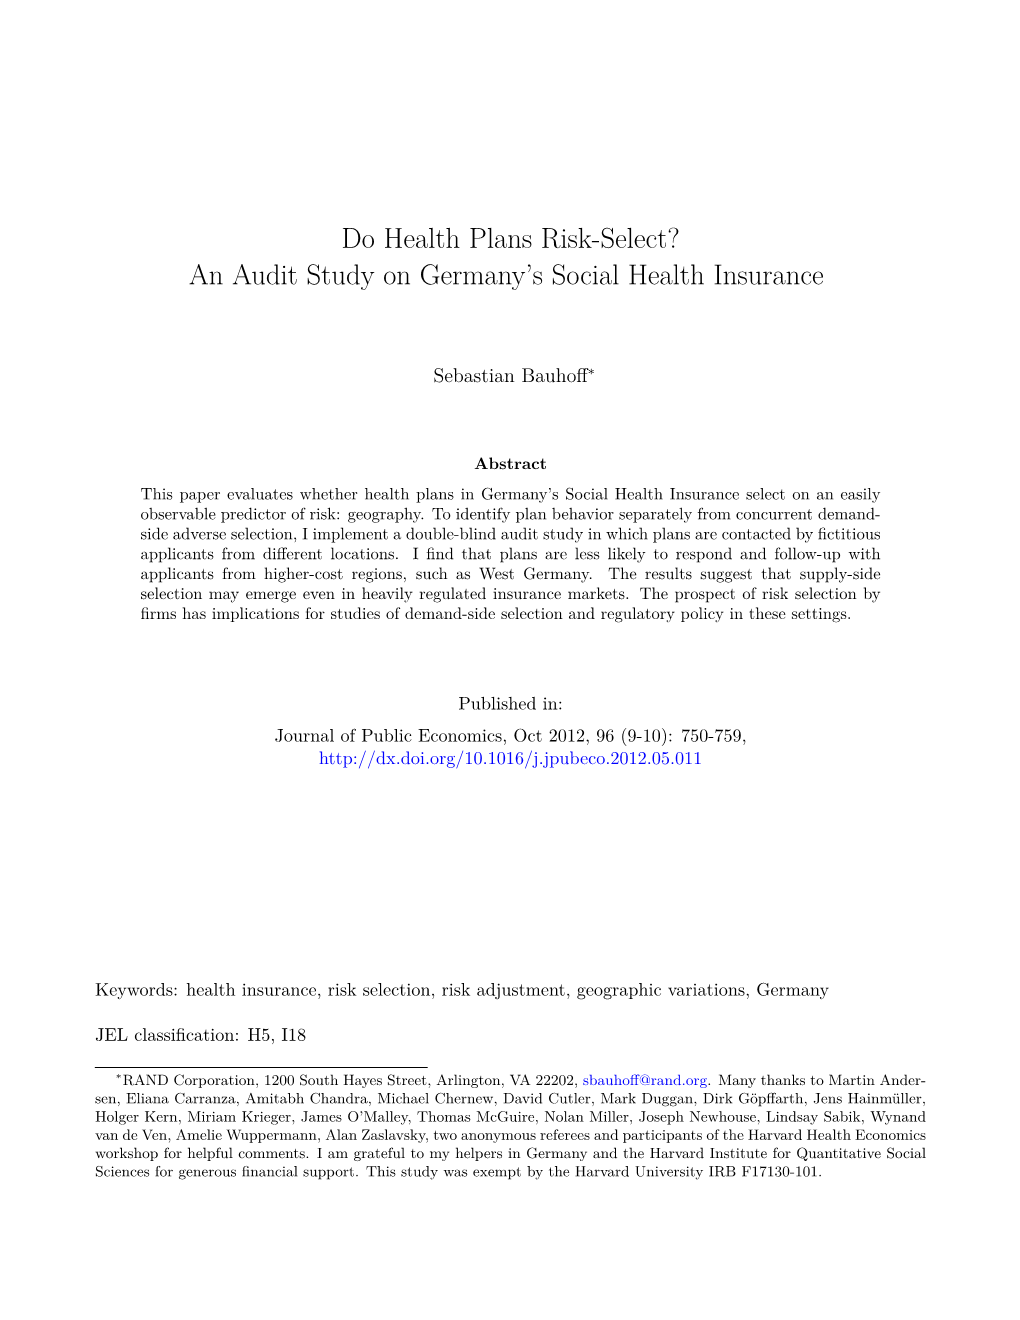 Do Health Plans Risk-Select? an Audit Study on Germany's Social